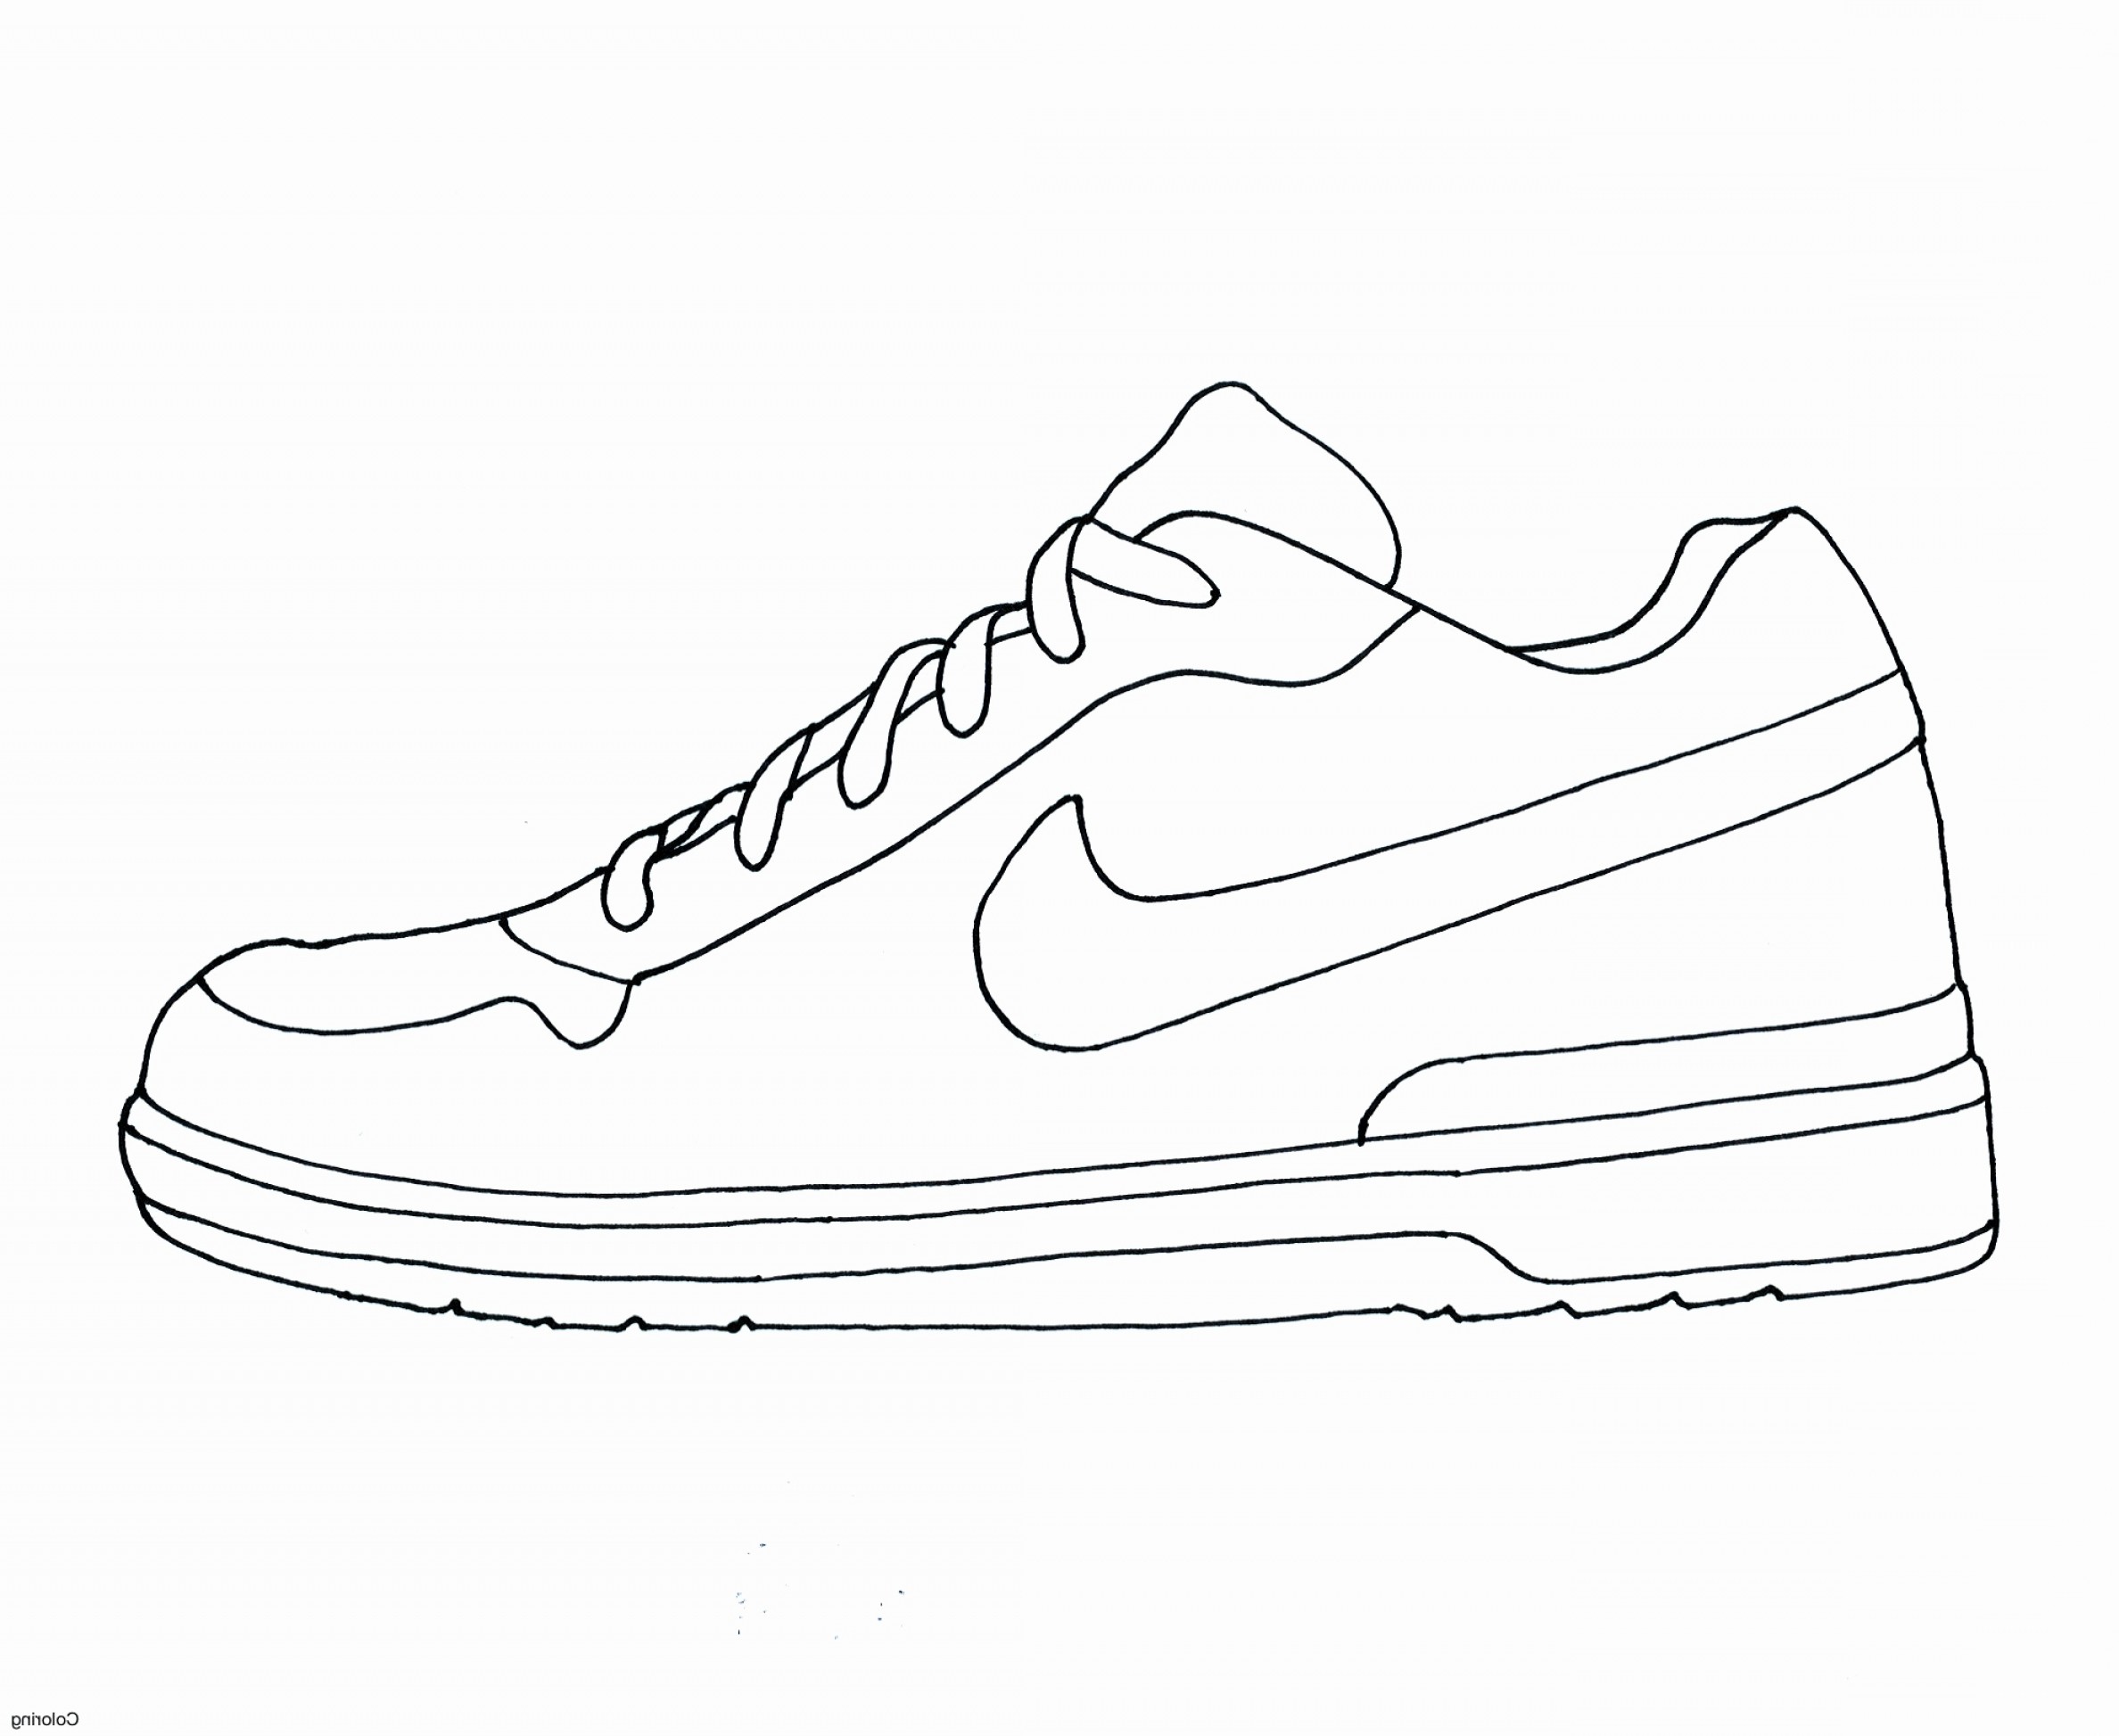 Jordan Shoes Coloring Pages posted by John Tremblay